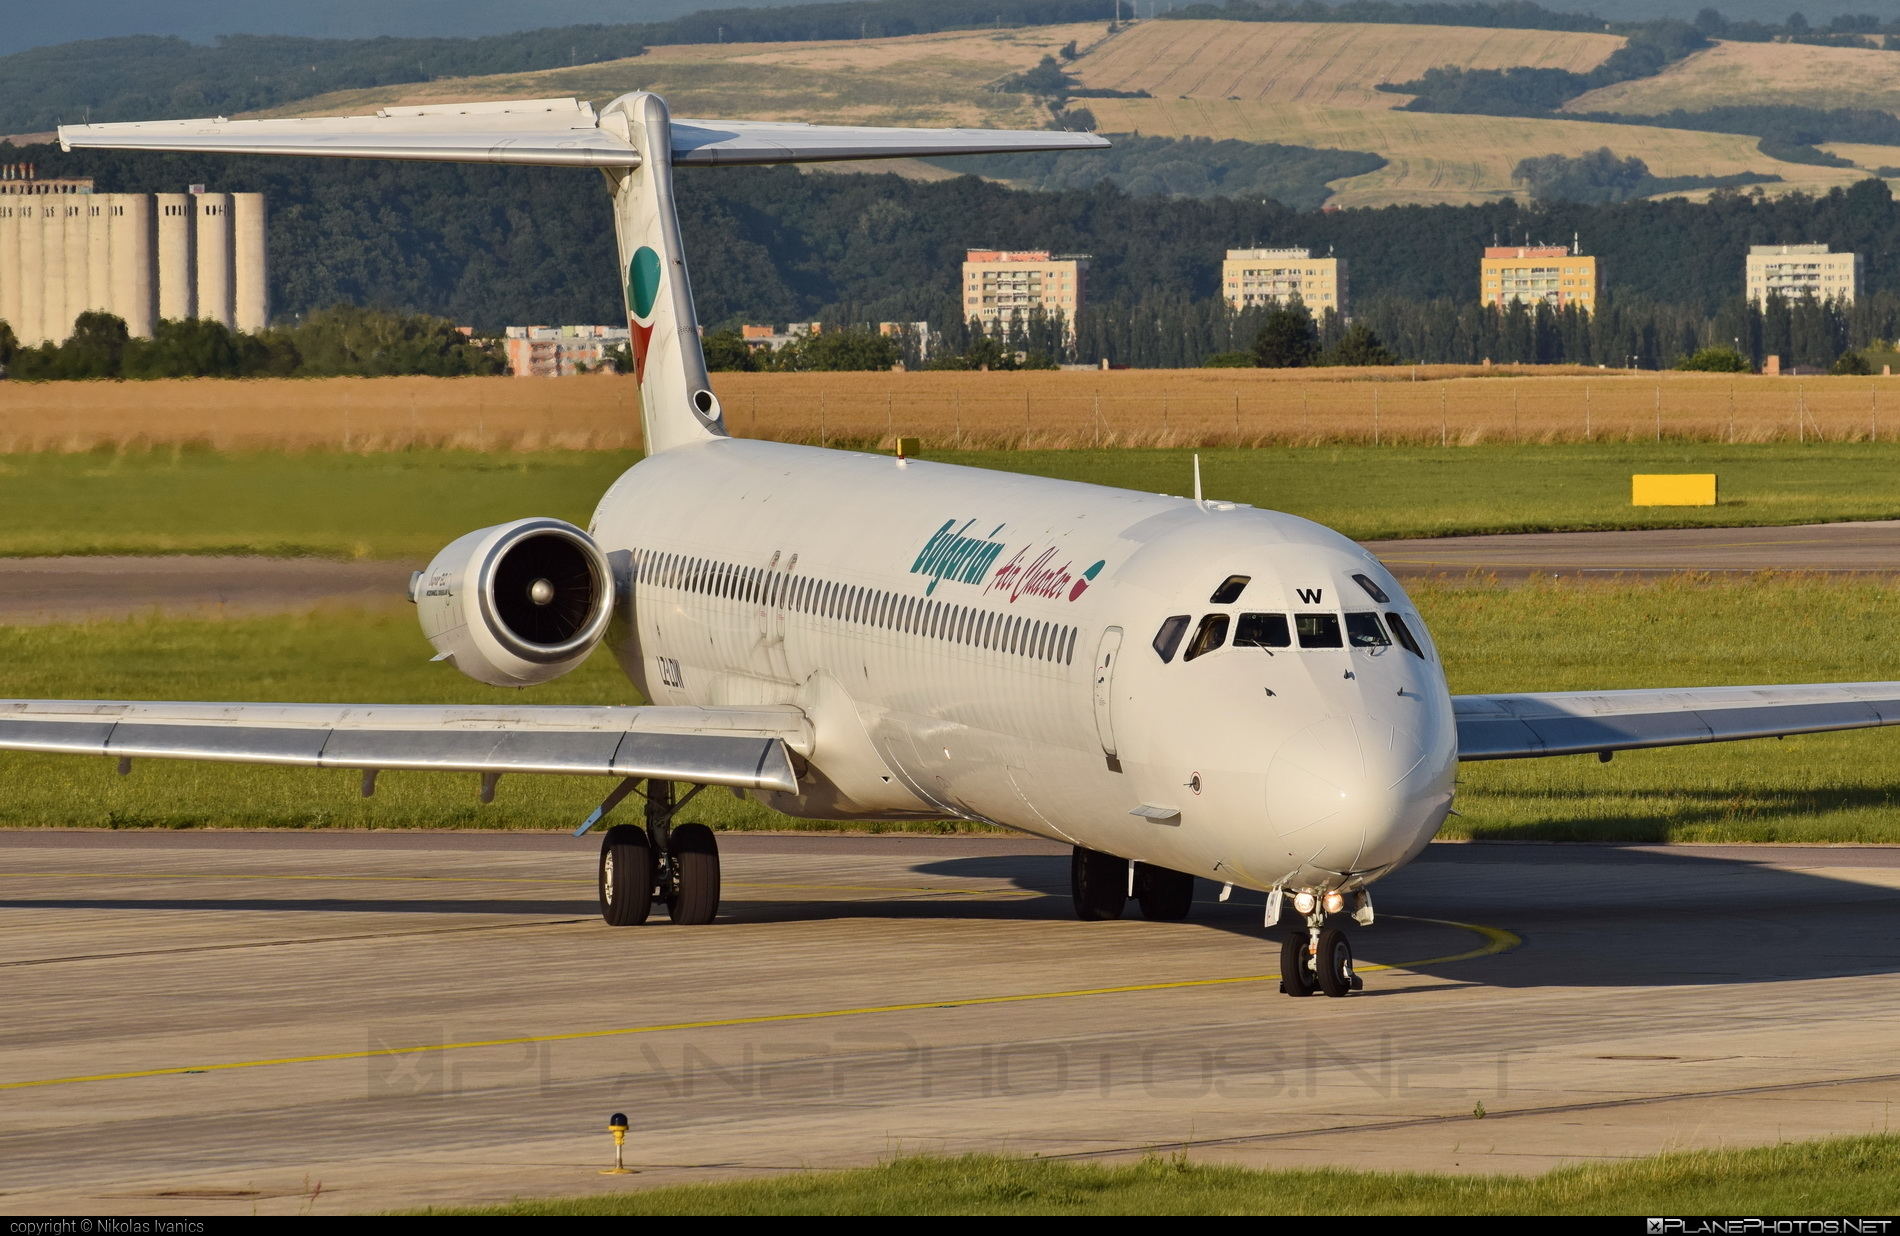 McDonnell Douglas MD-82 - LZ-LDW operated by Bulgarian Air Charter #bulgarianaircharter #mcDonnellDouglas #mcdonnelldouglas80 #mcdonnelldouglas82 #mcdonnelldouglasmd80 #mcdonnelldouglasmd82 #md80 #md82